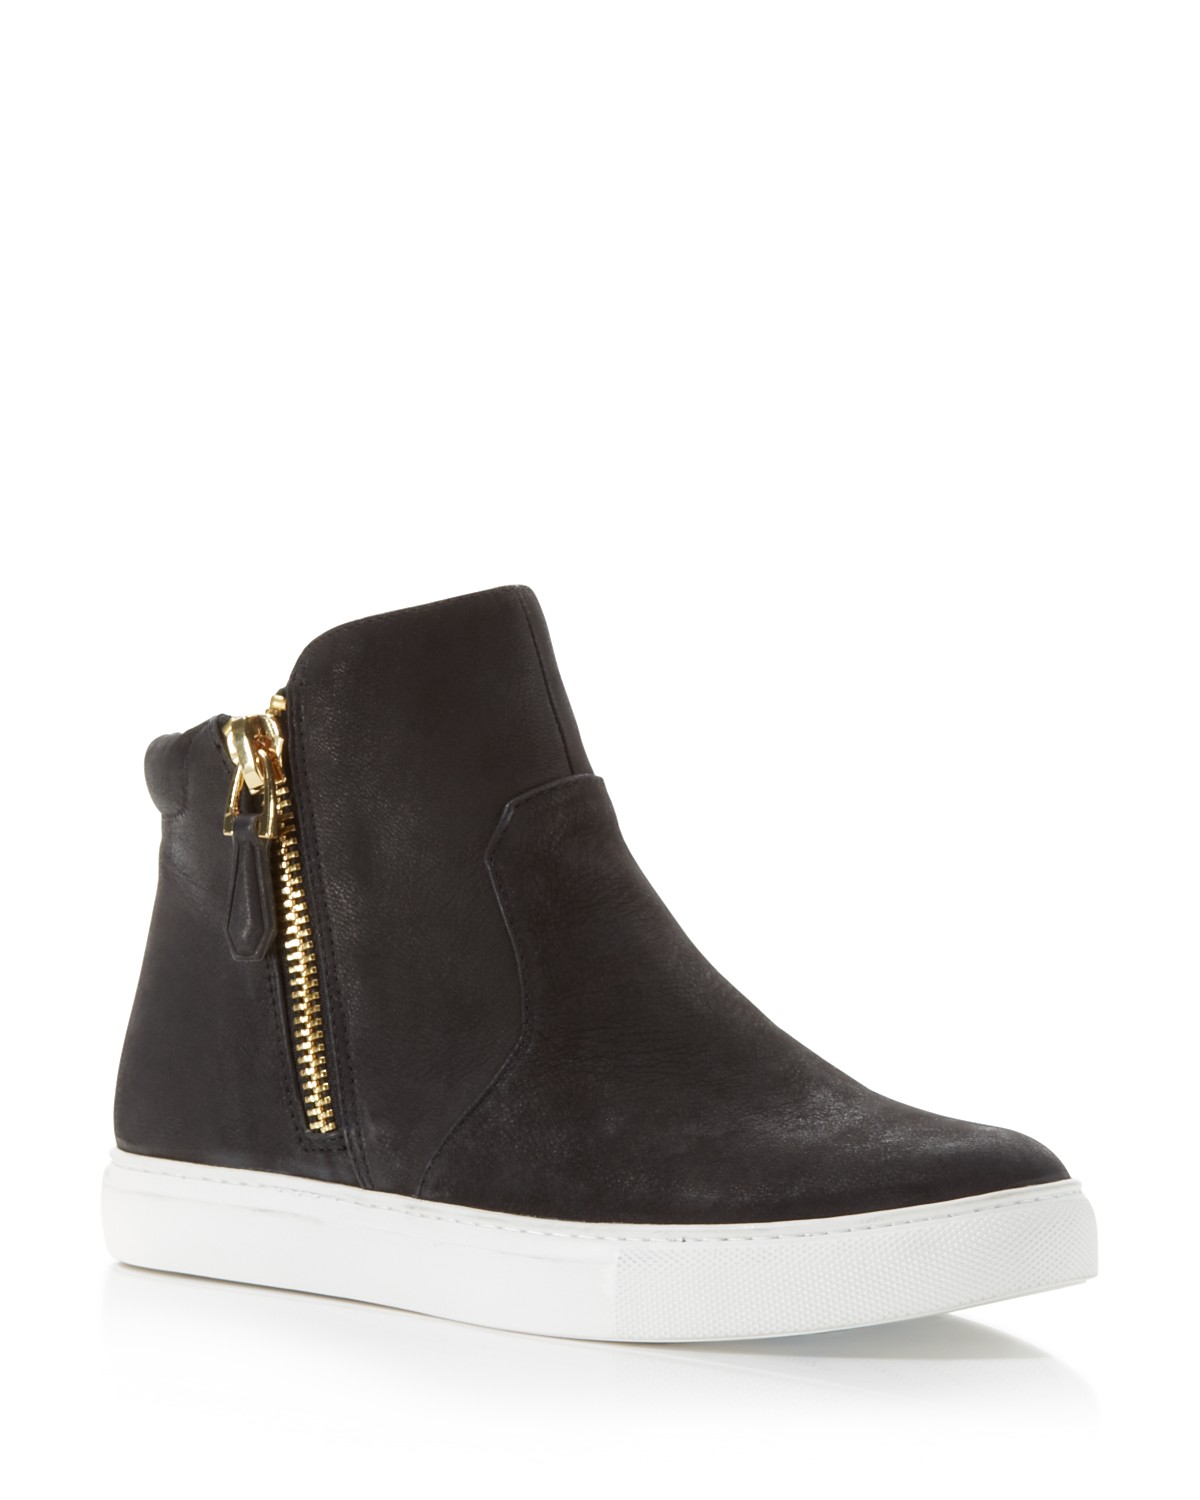 Kenneth Cole Side Zip High-Tops